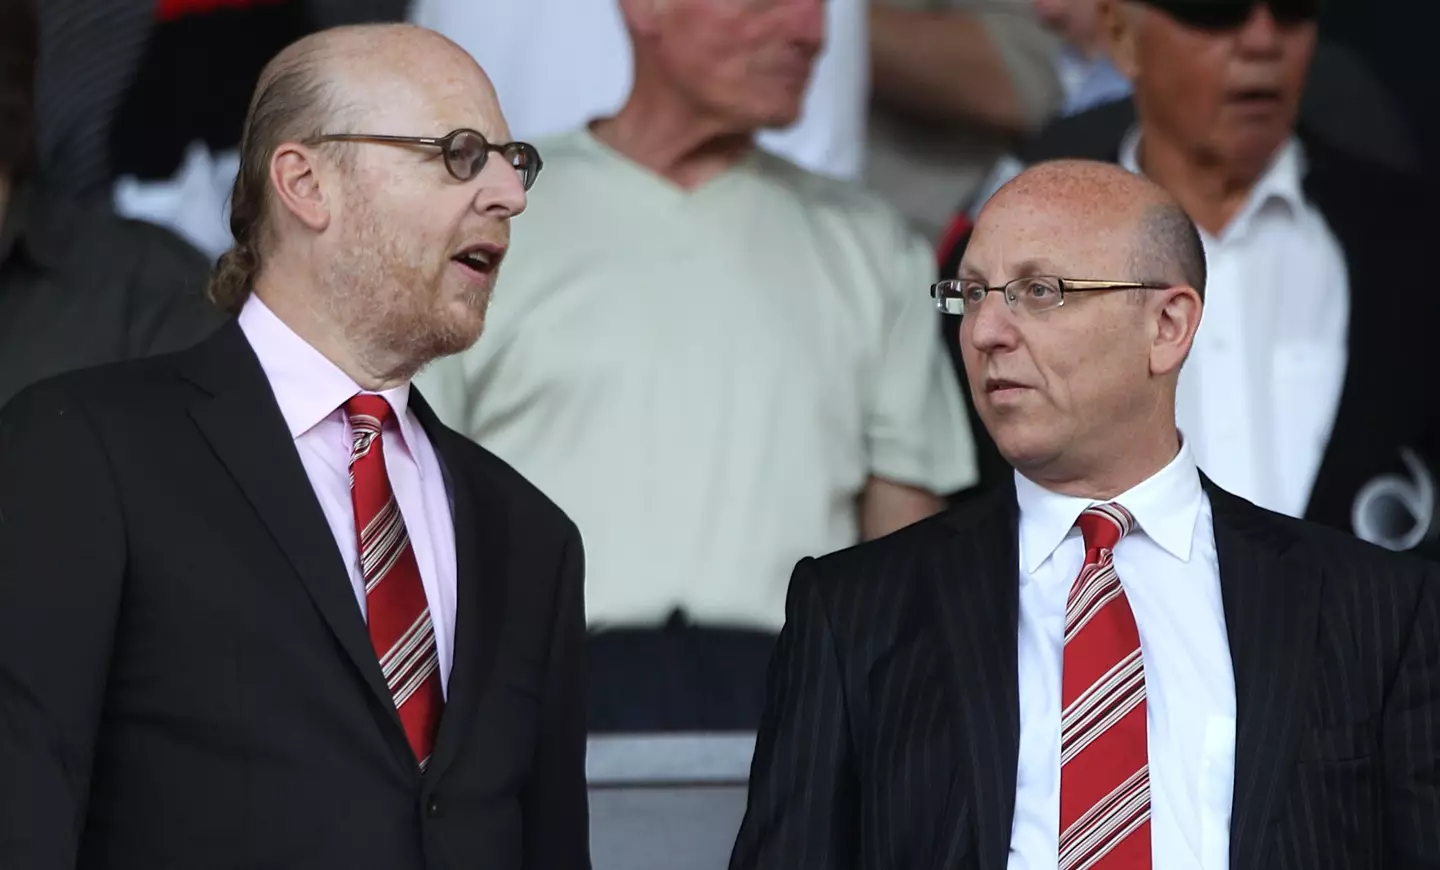 The Glazer family are unpopular owners. (Image